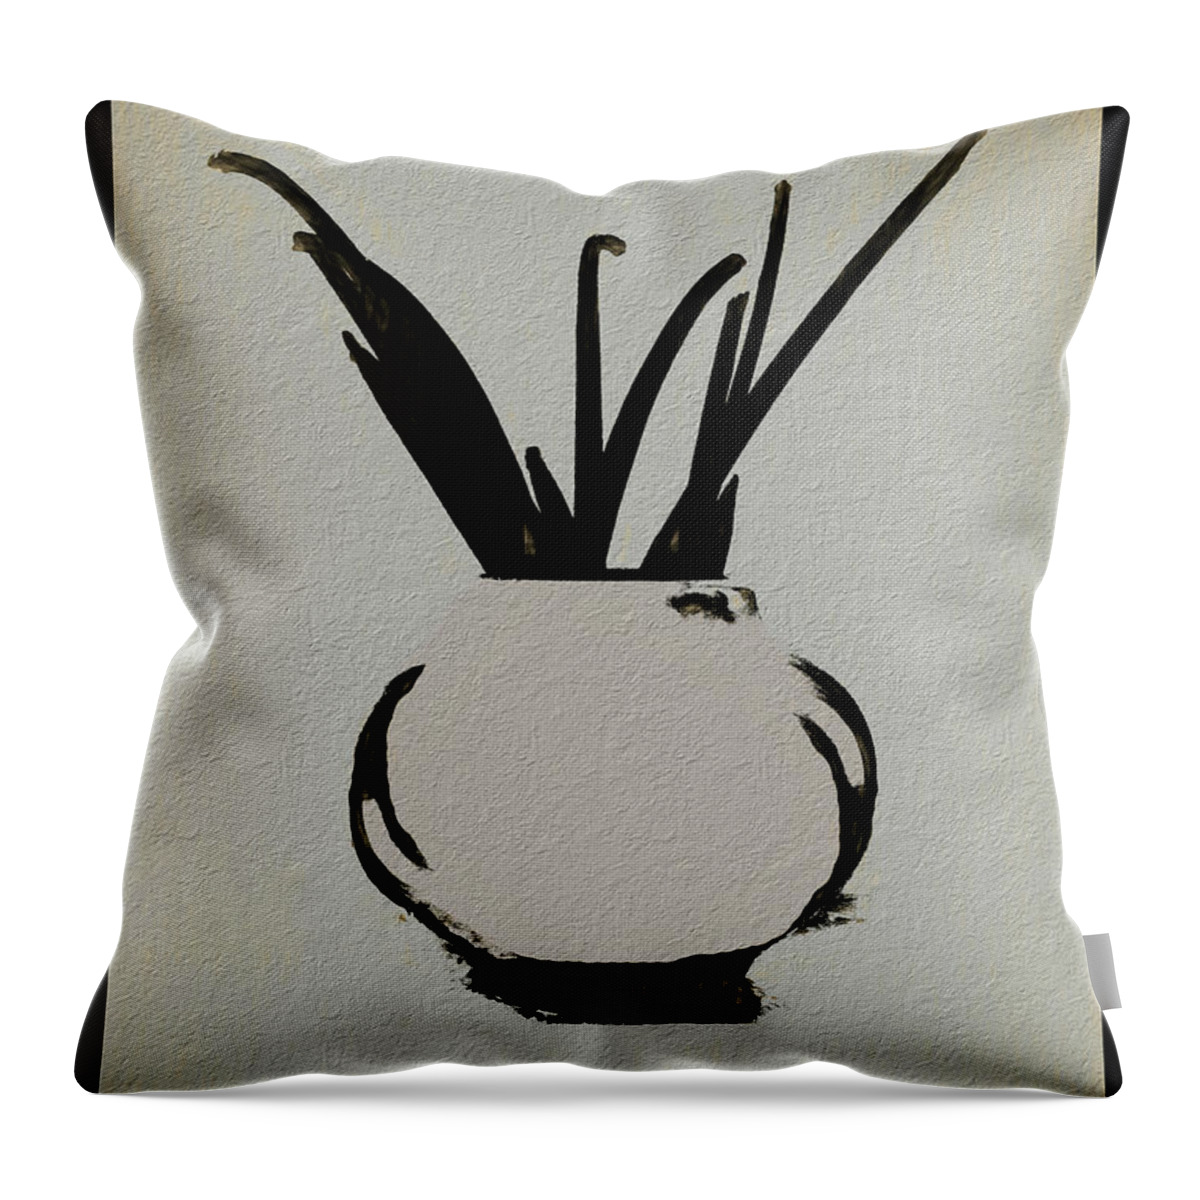 Mangrove Throw Pillow featuring the painting Mangrove by Kandy Hurley